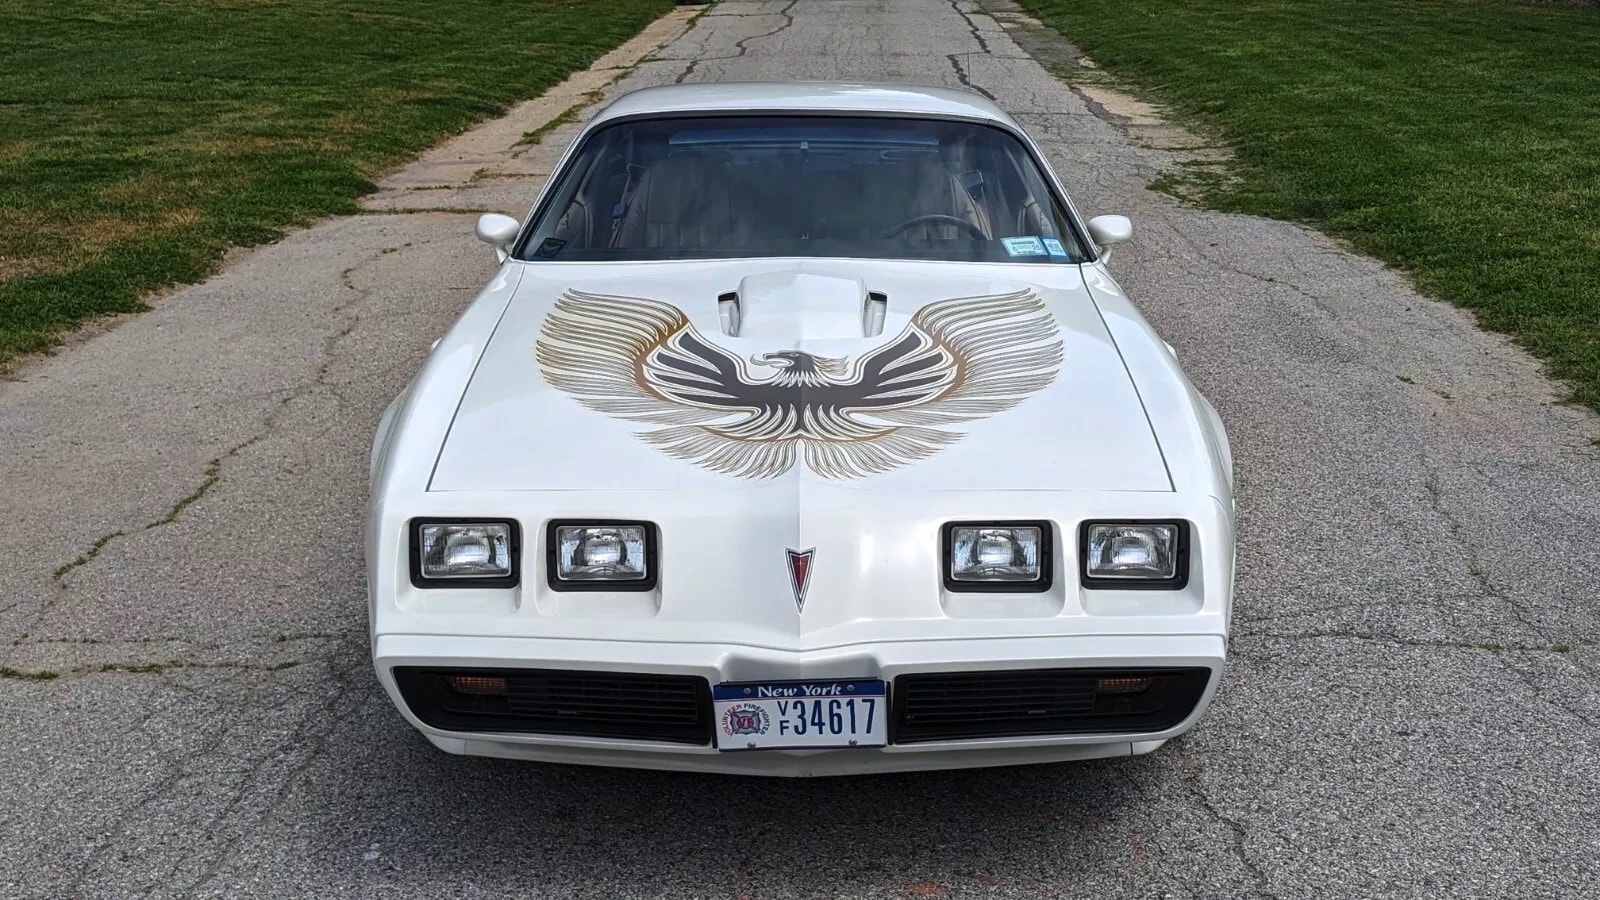 Pristine 1981 Pontiac Trans Am Hits eBay with Impeccable Preservation